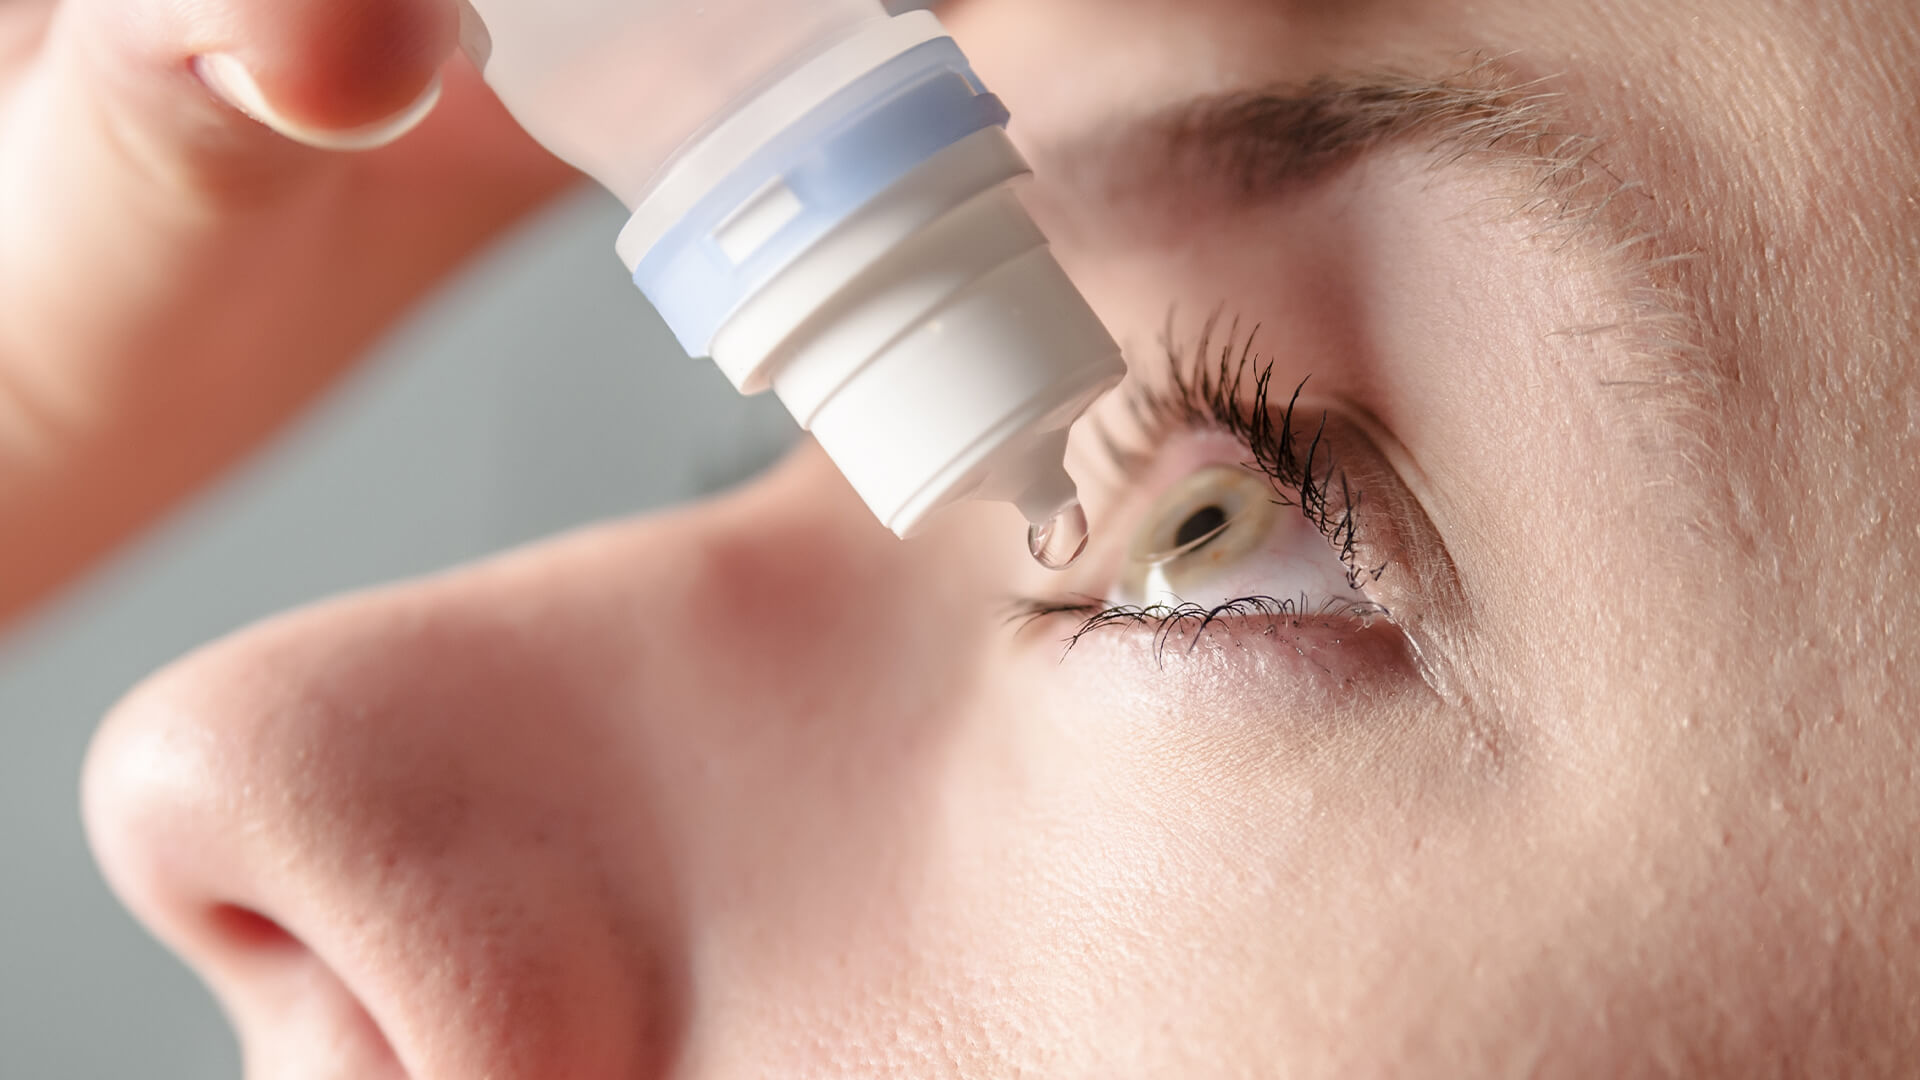 People with dry eye can suffer in silence for up to three years before finding an effective treatment